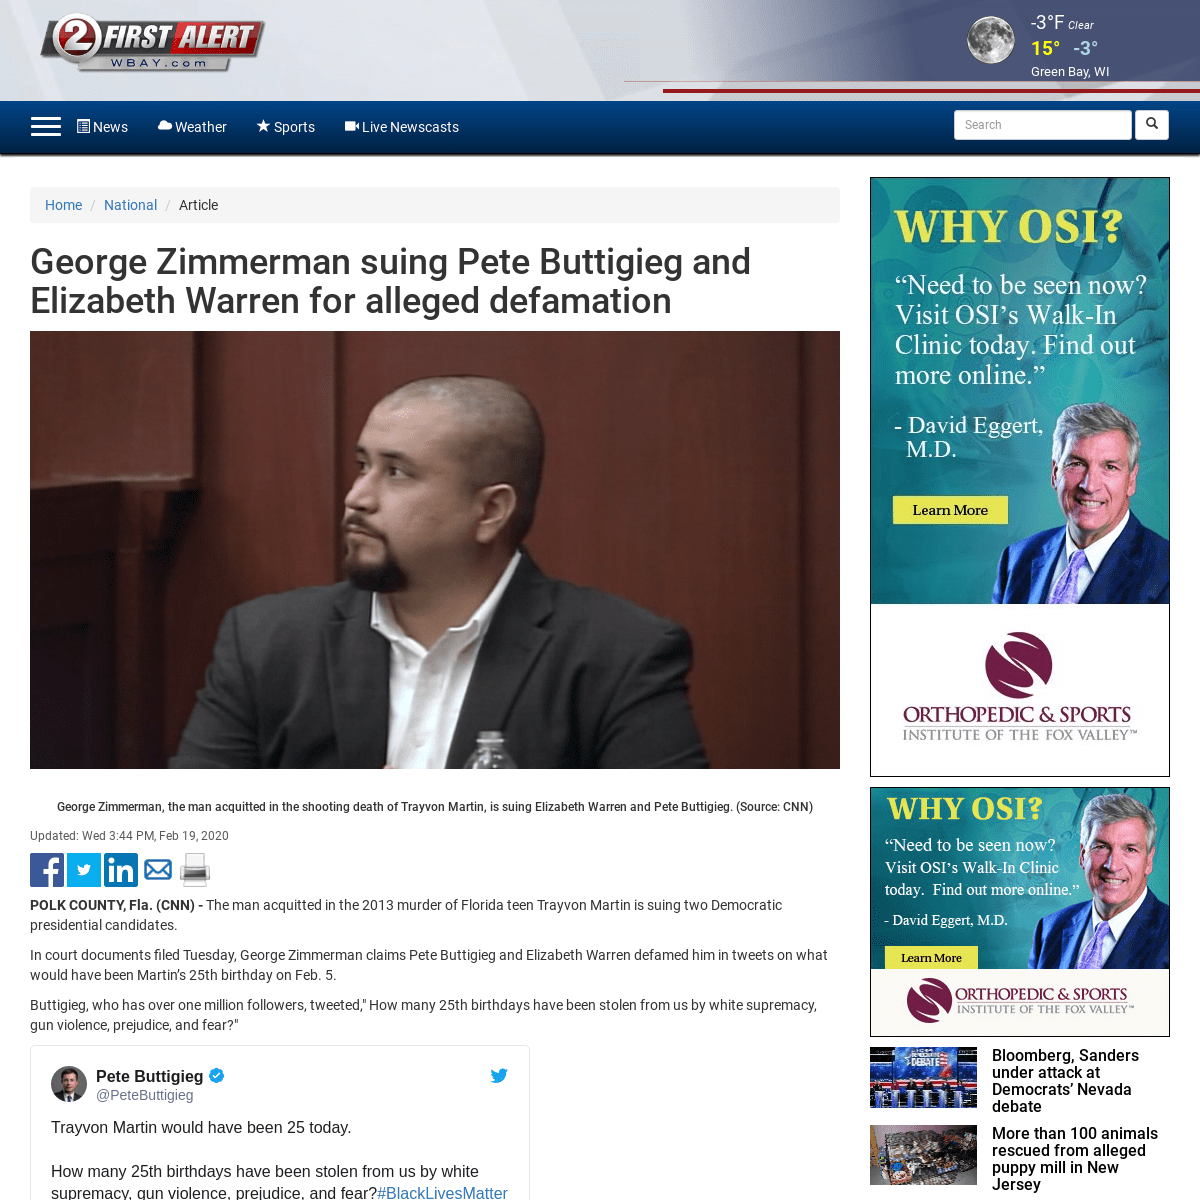 A complete backup of www.wbay.com/content/news/George-Zimmerman-suing-Pete-Buttigieg-and-Elizabeth-Warren-for-alleged-defamation